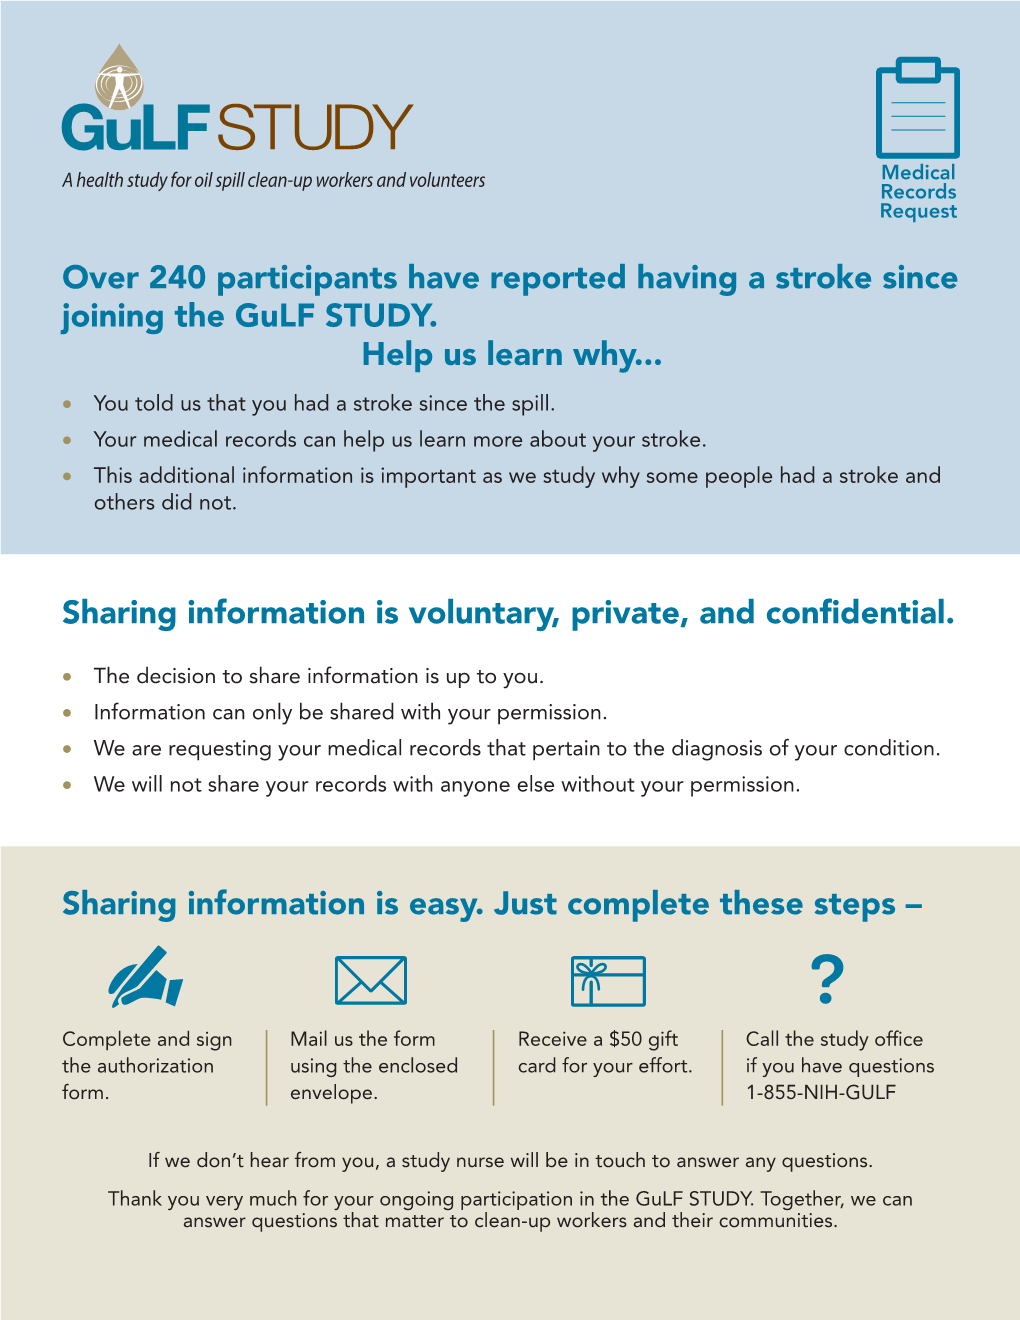 Sharing Information Is Voluntary, Private, and Confidential